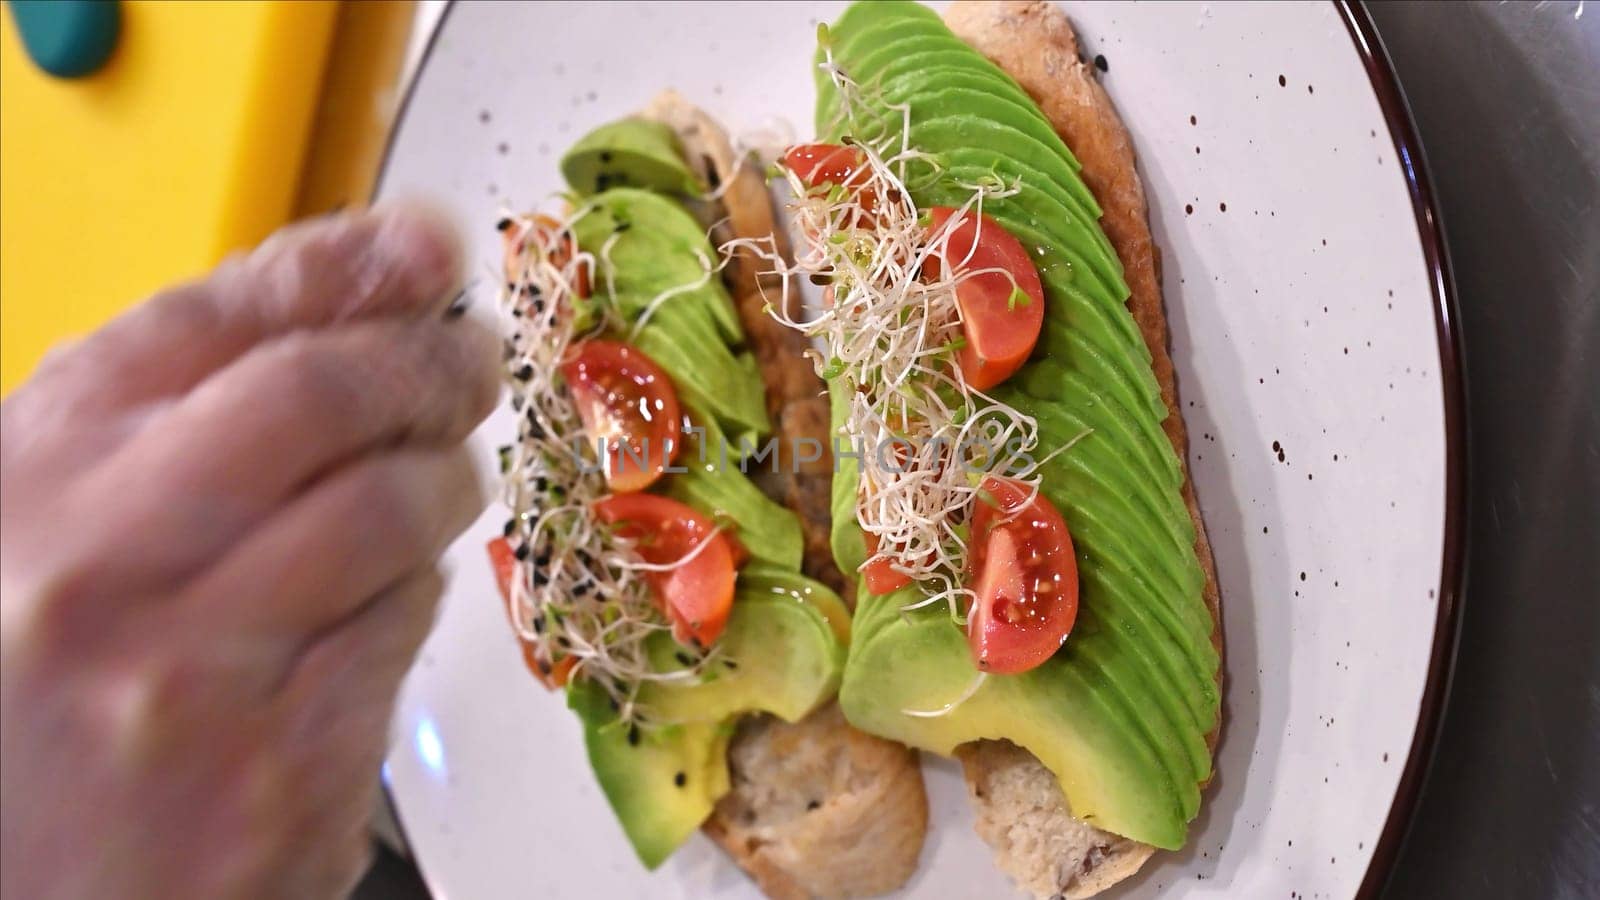 Avocado toast with small tomatoes on rye bread toast with soft cheese and sprouts. Healthy breakfast